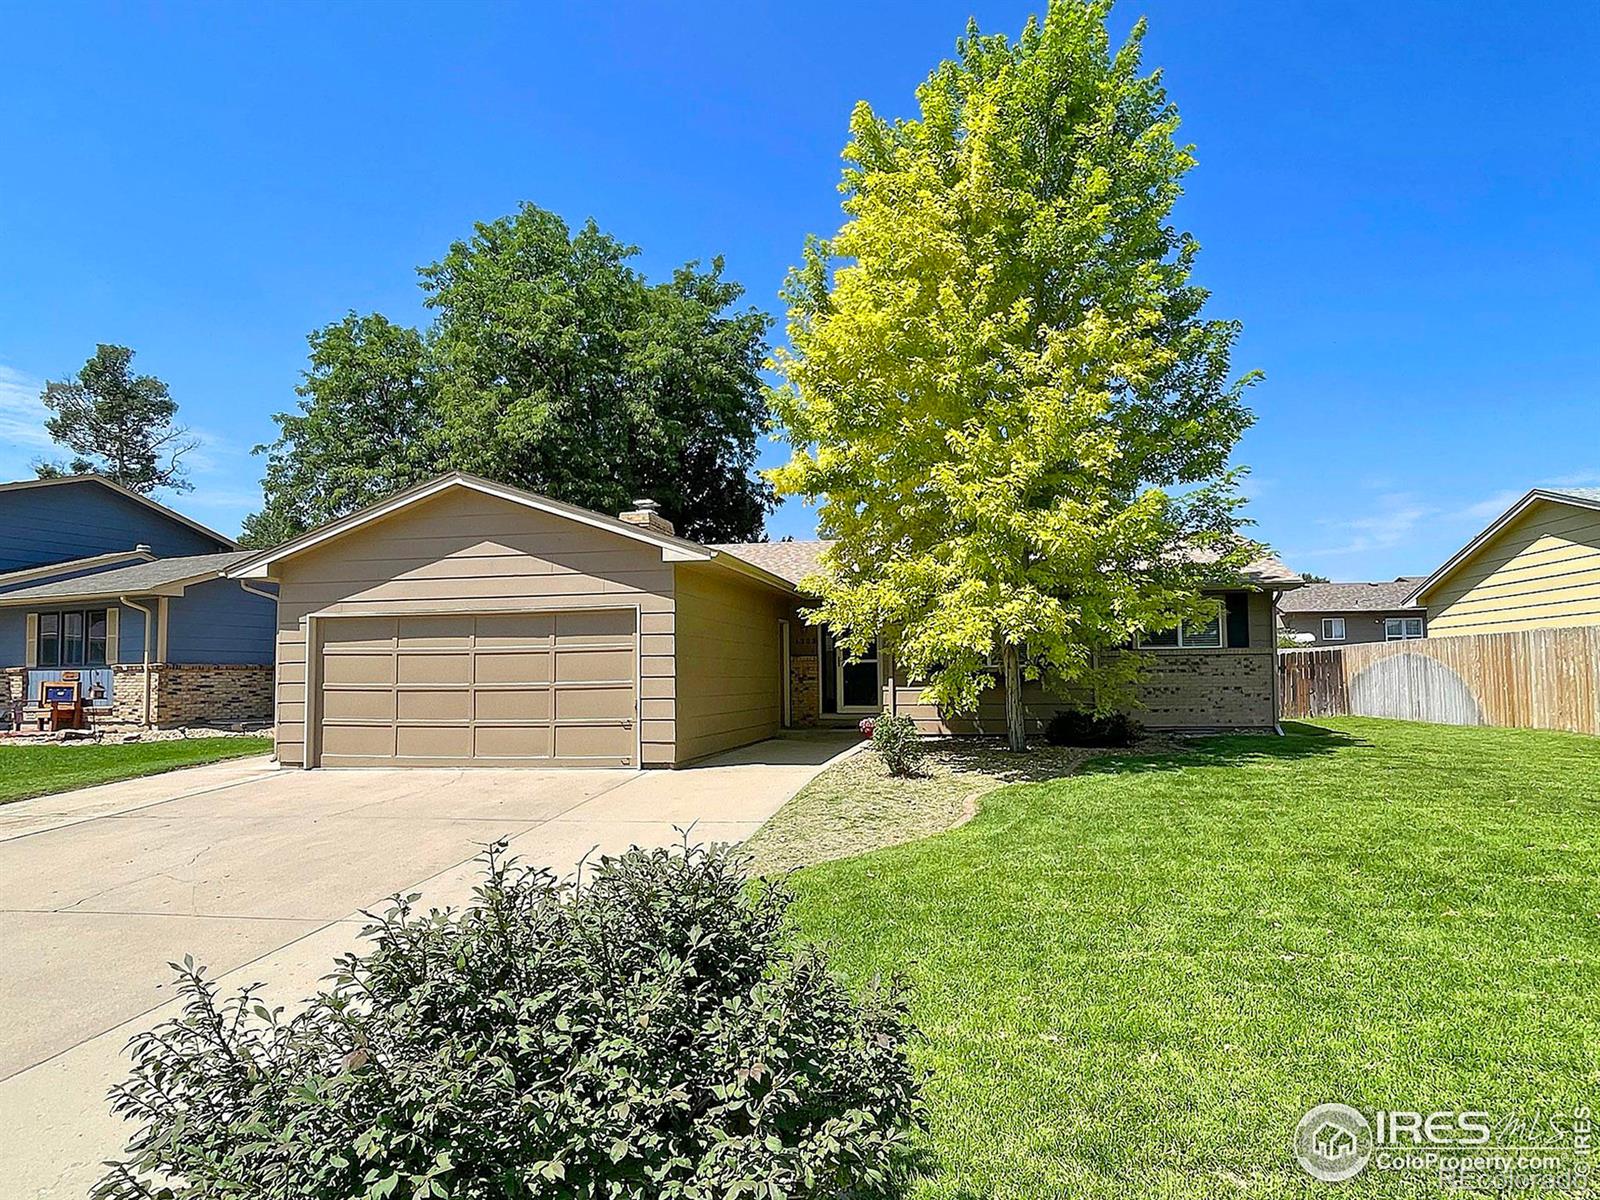 1305  38th Avenue, greeley MLS: 123456789993476 Beds: 4 Baths: 2 Price: $410,000